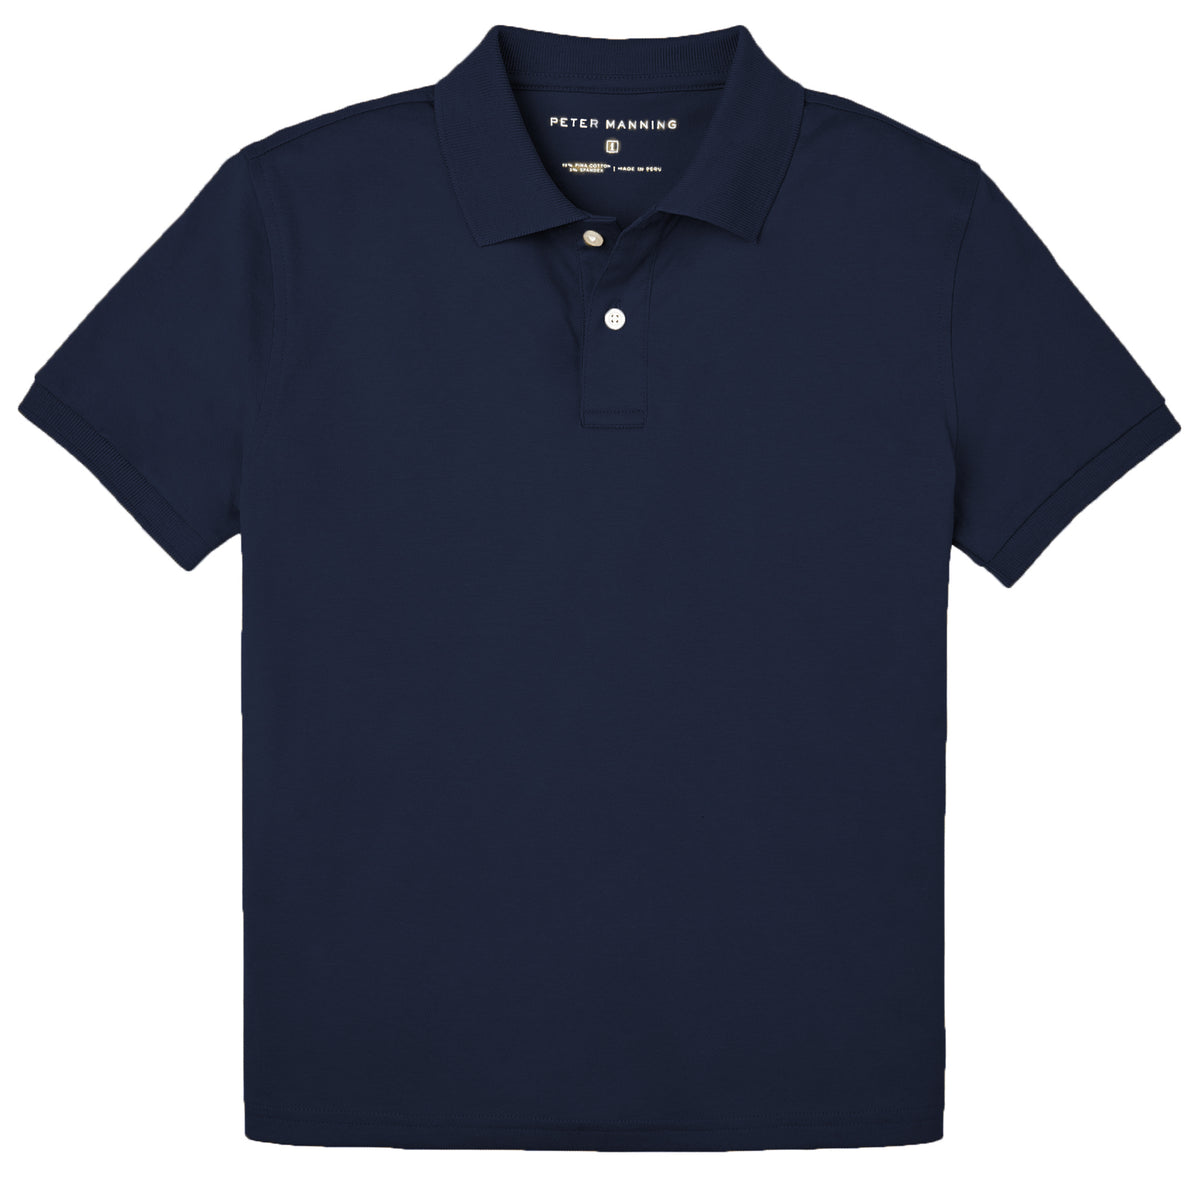 James Polo Shirt, Navy | Peter Manning NYC